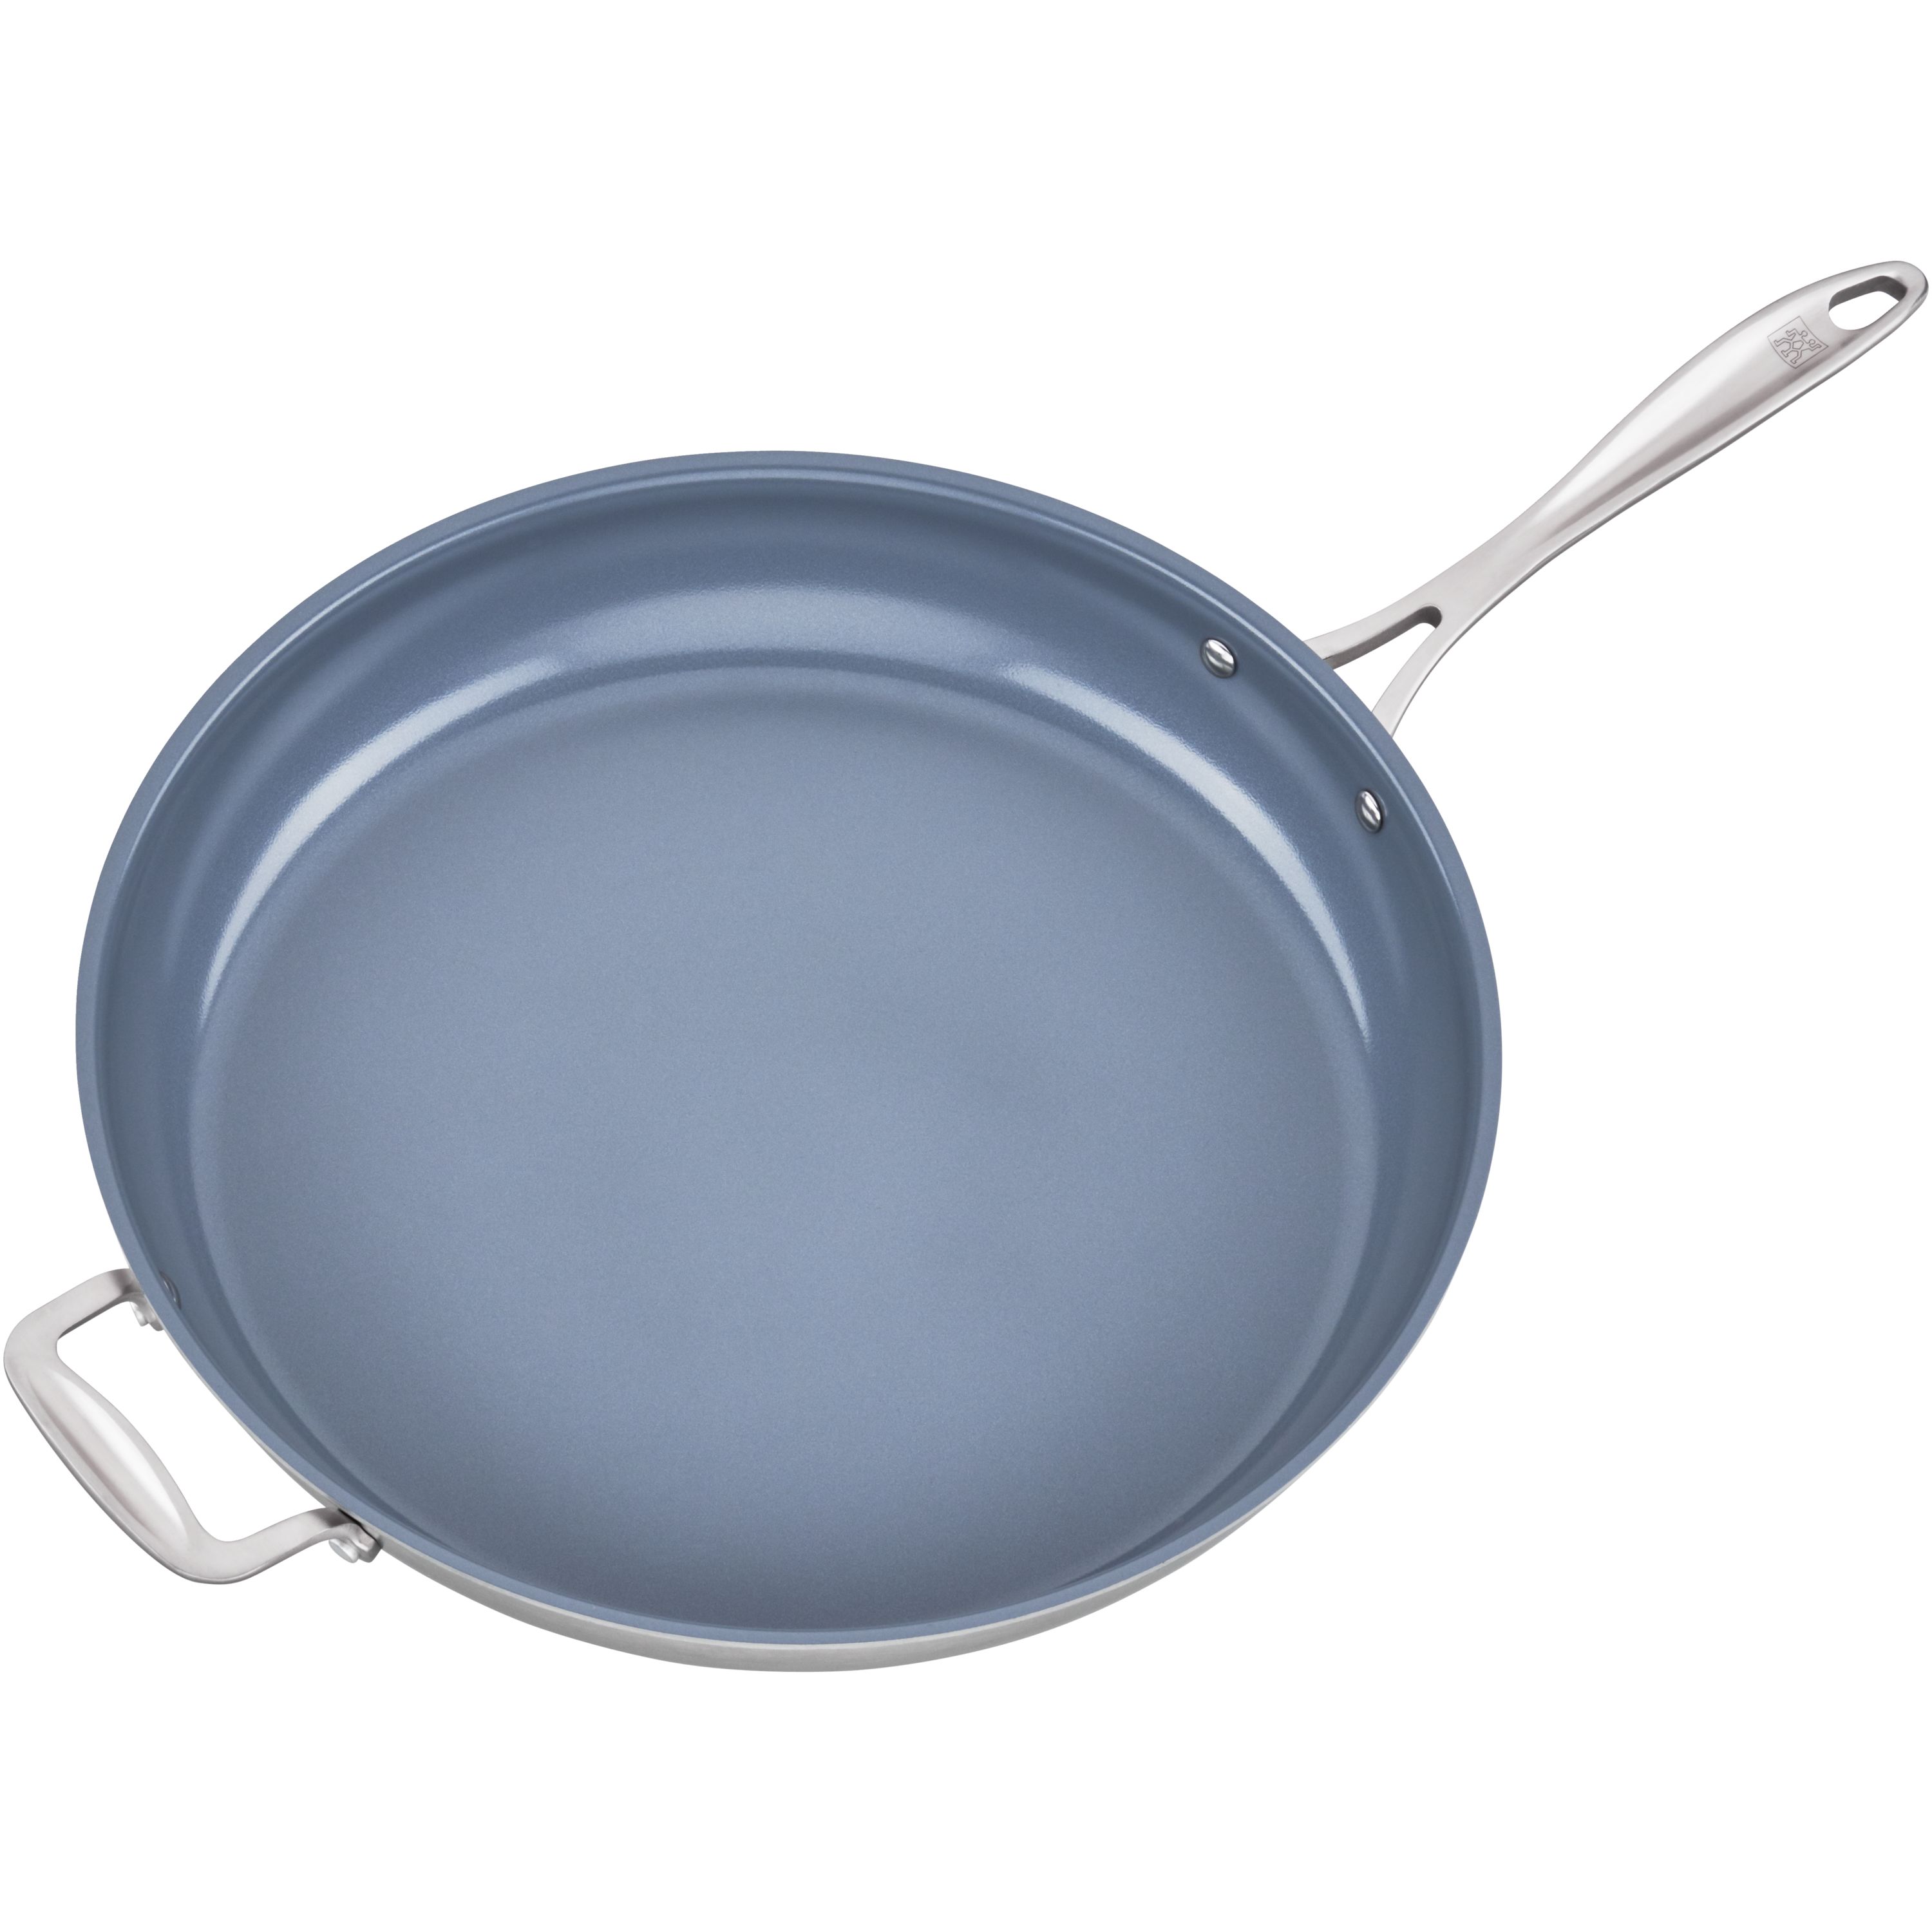 Shoppers Have Finally Discovered a Nonstick Frying Pan That  Works—and It's Only $25